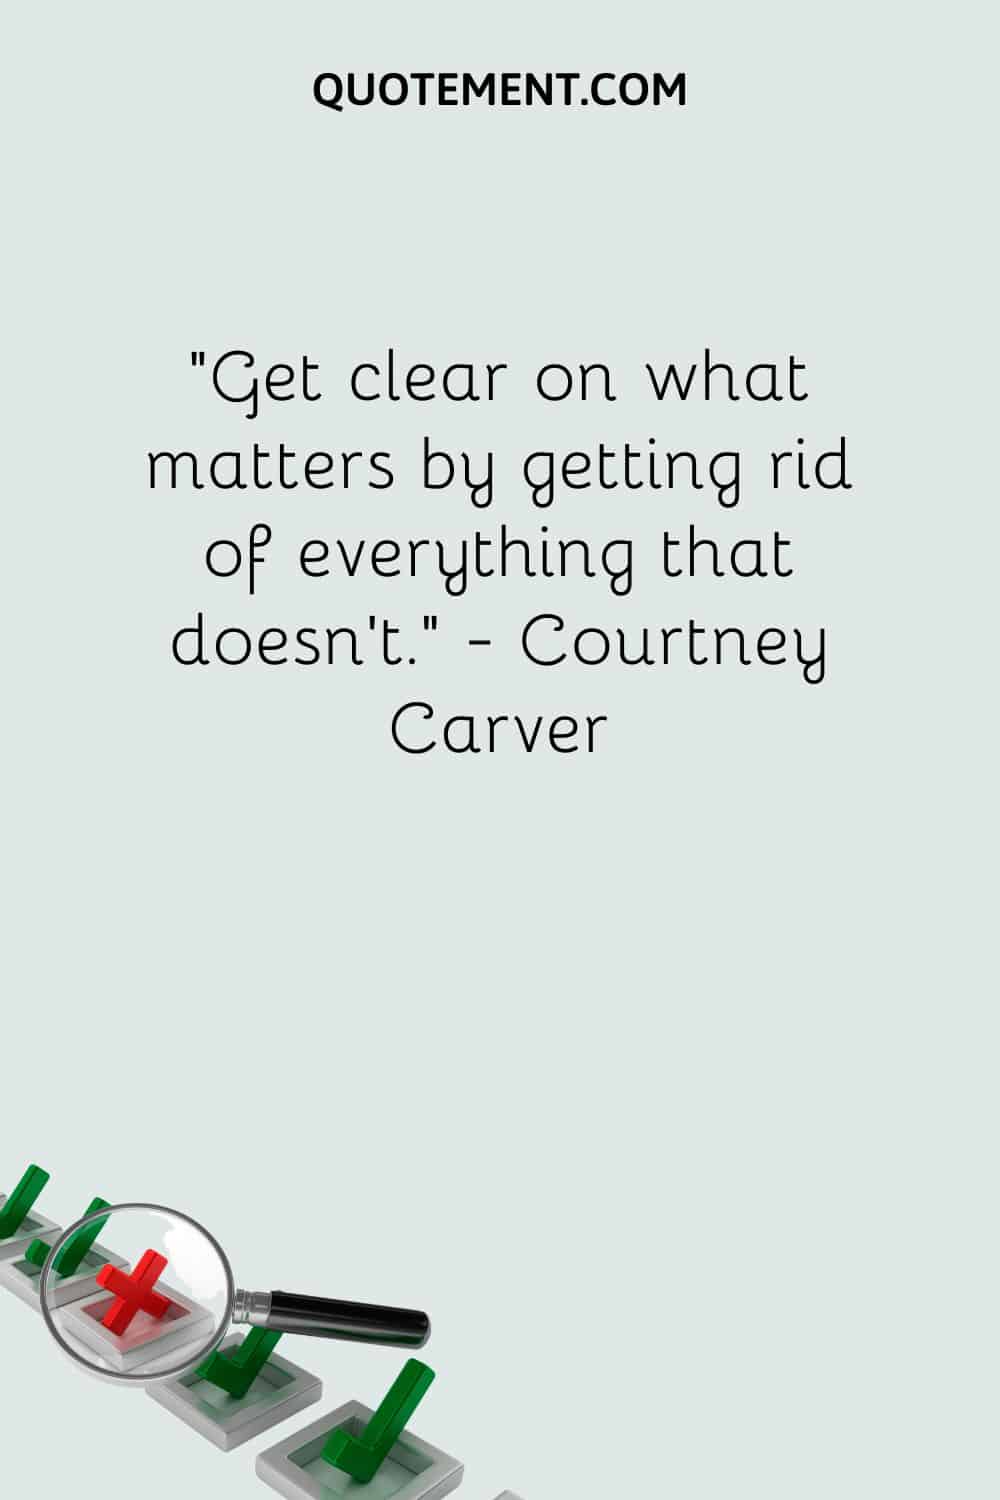 Get clear on what matters by getting rid of everything that doesn’t.